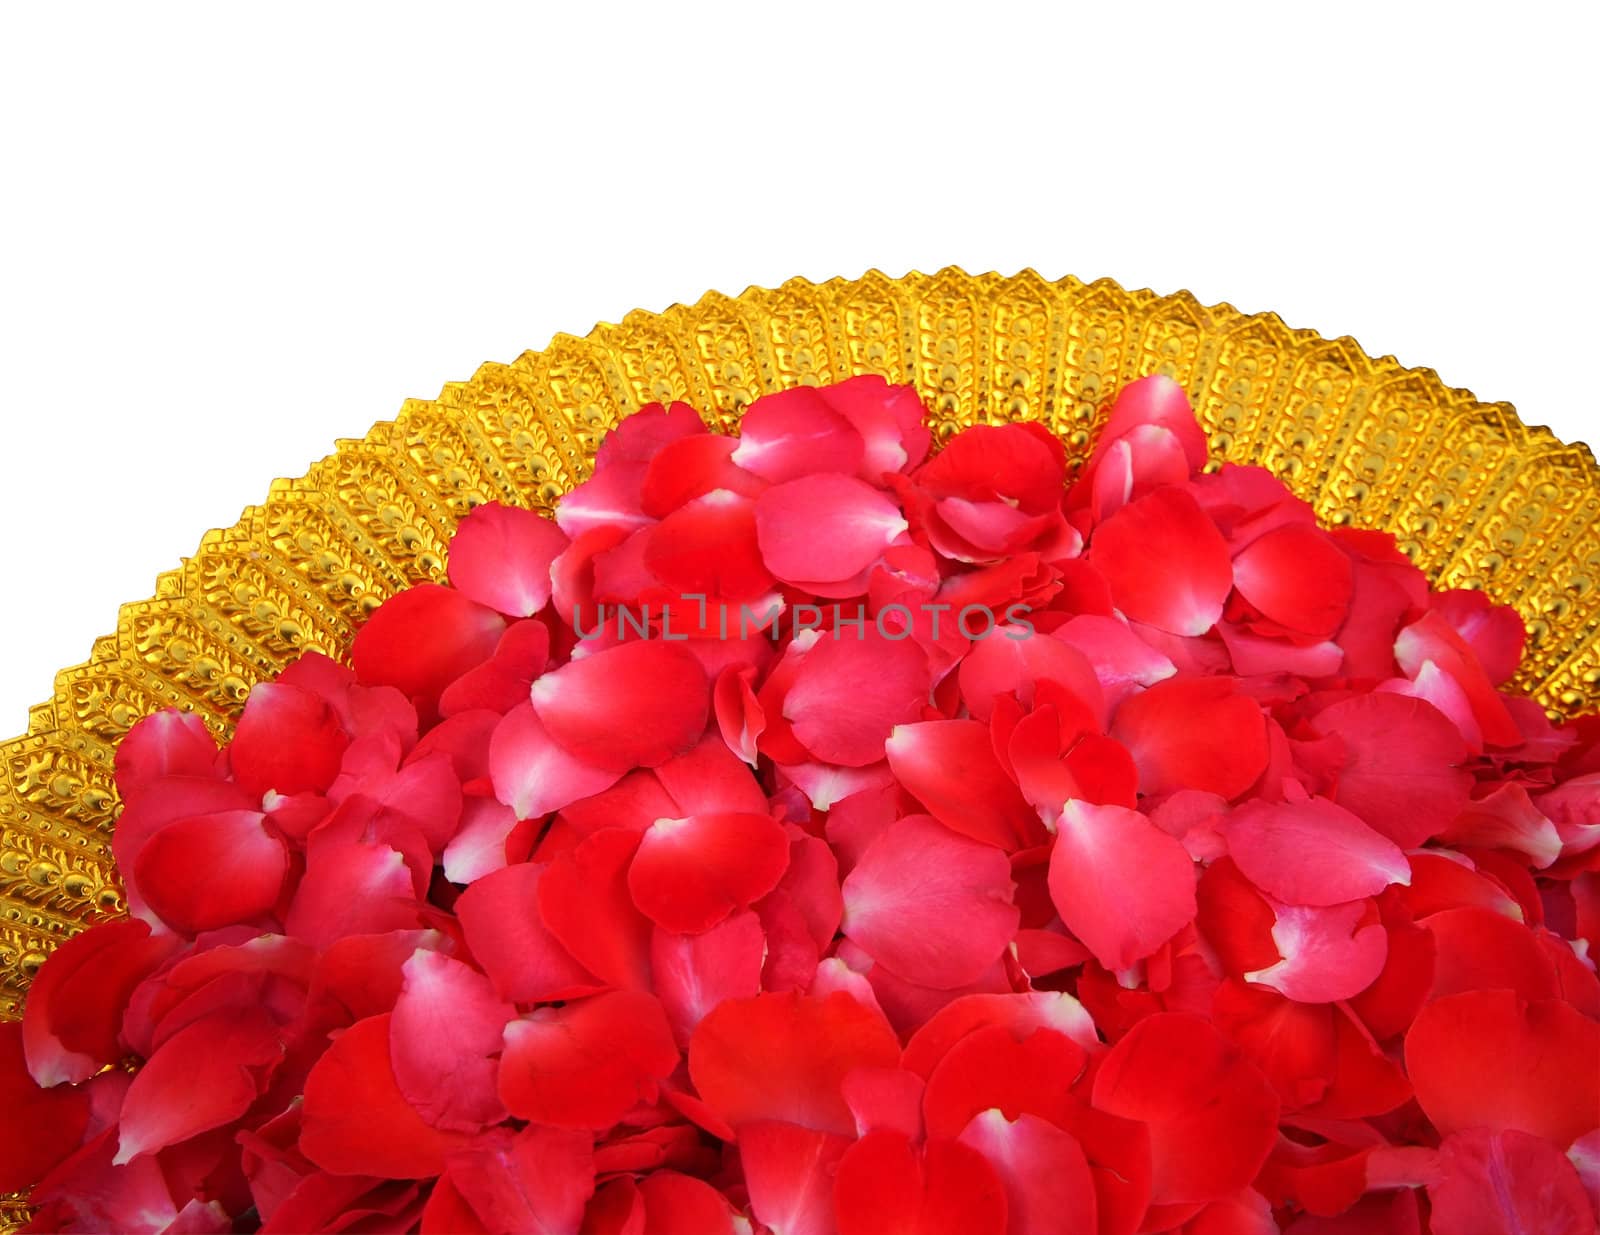 Red rose petals in Golden Bowl on white background